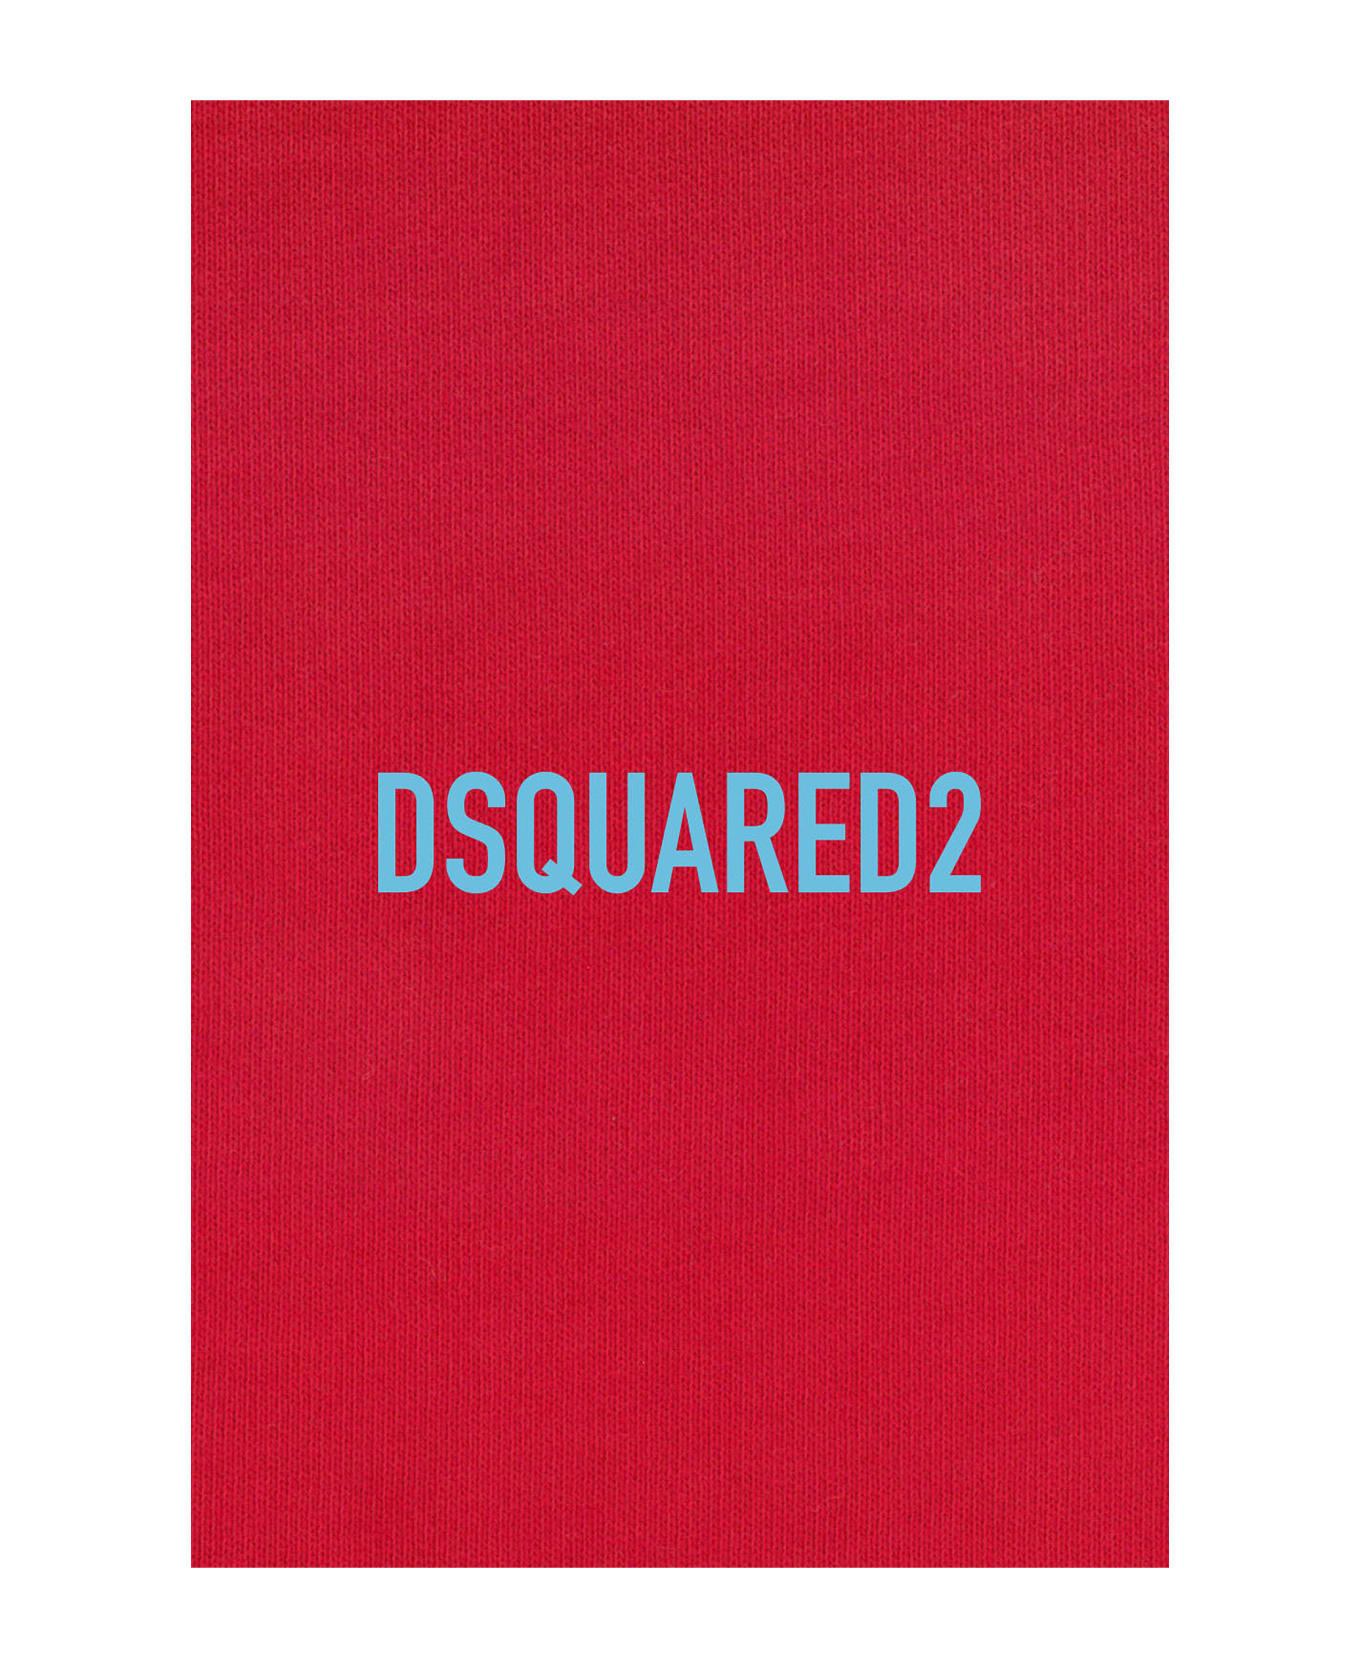 Dsquared2 T-shirts - Scarlet red